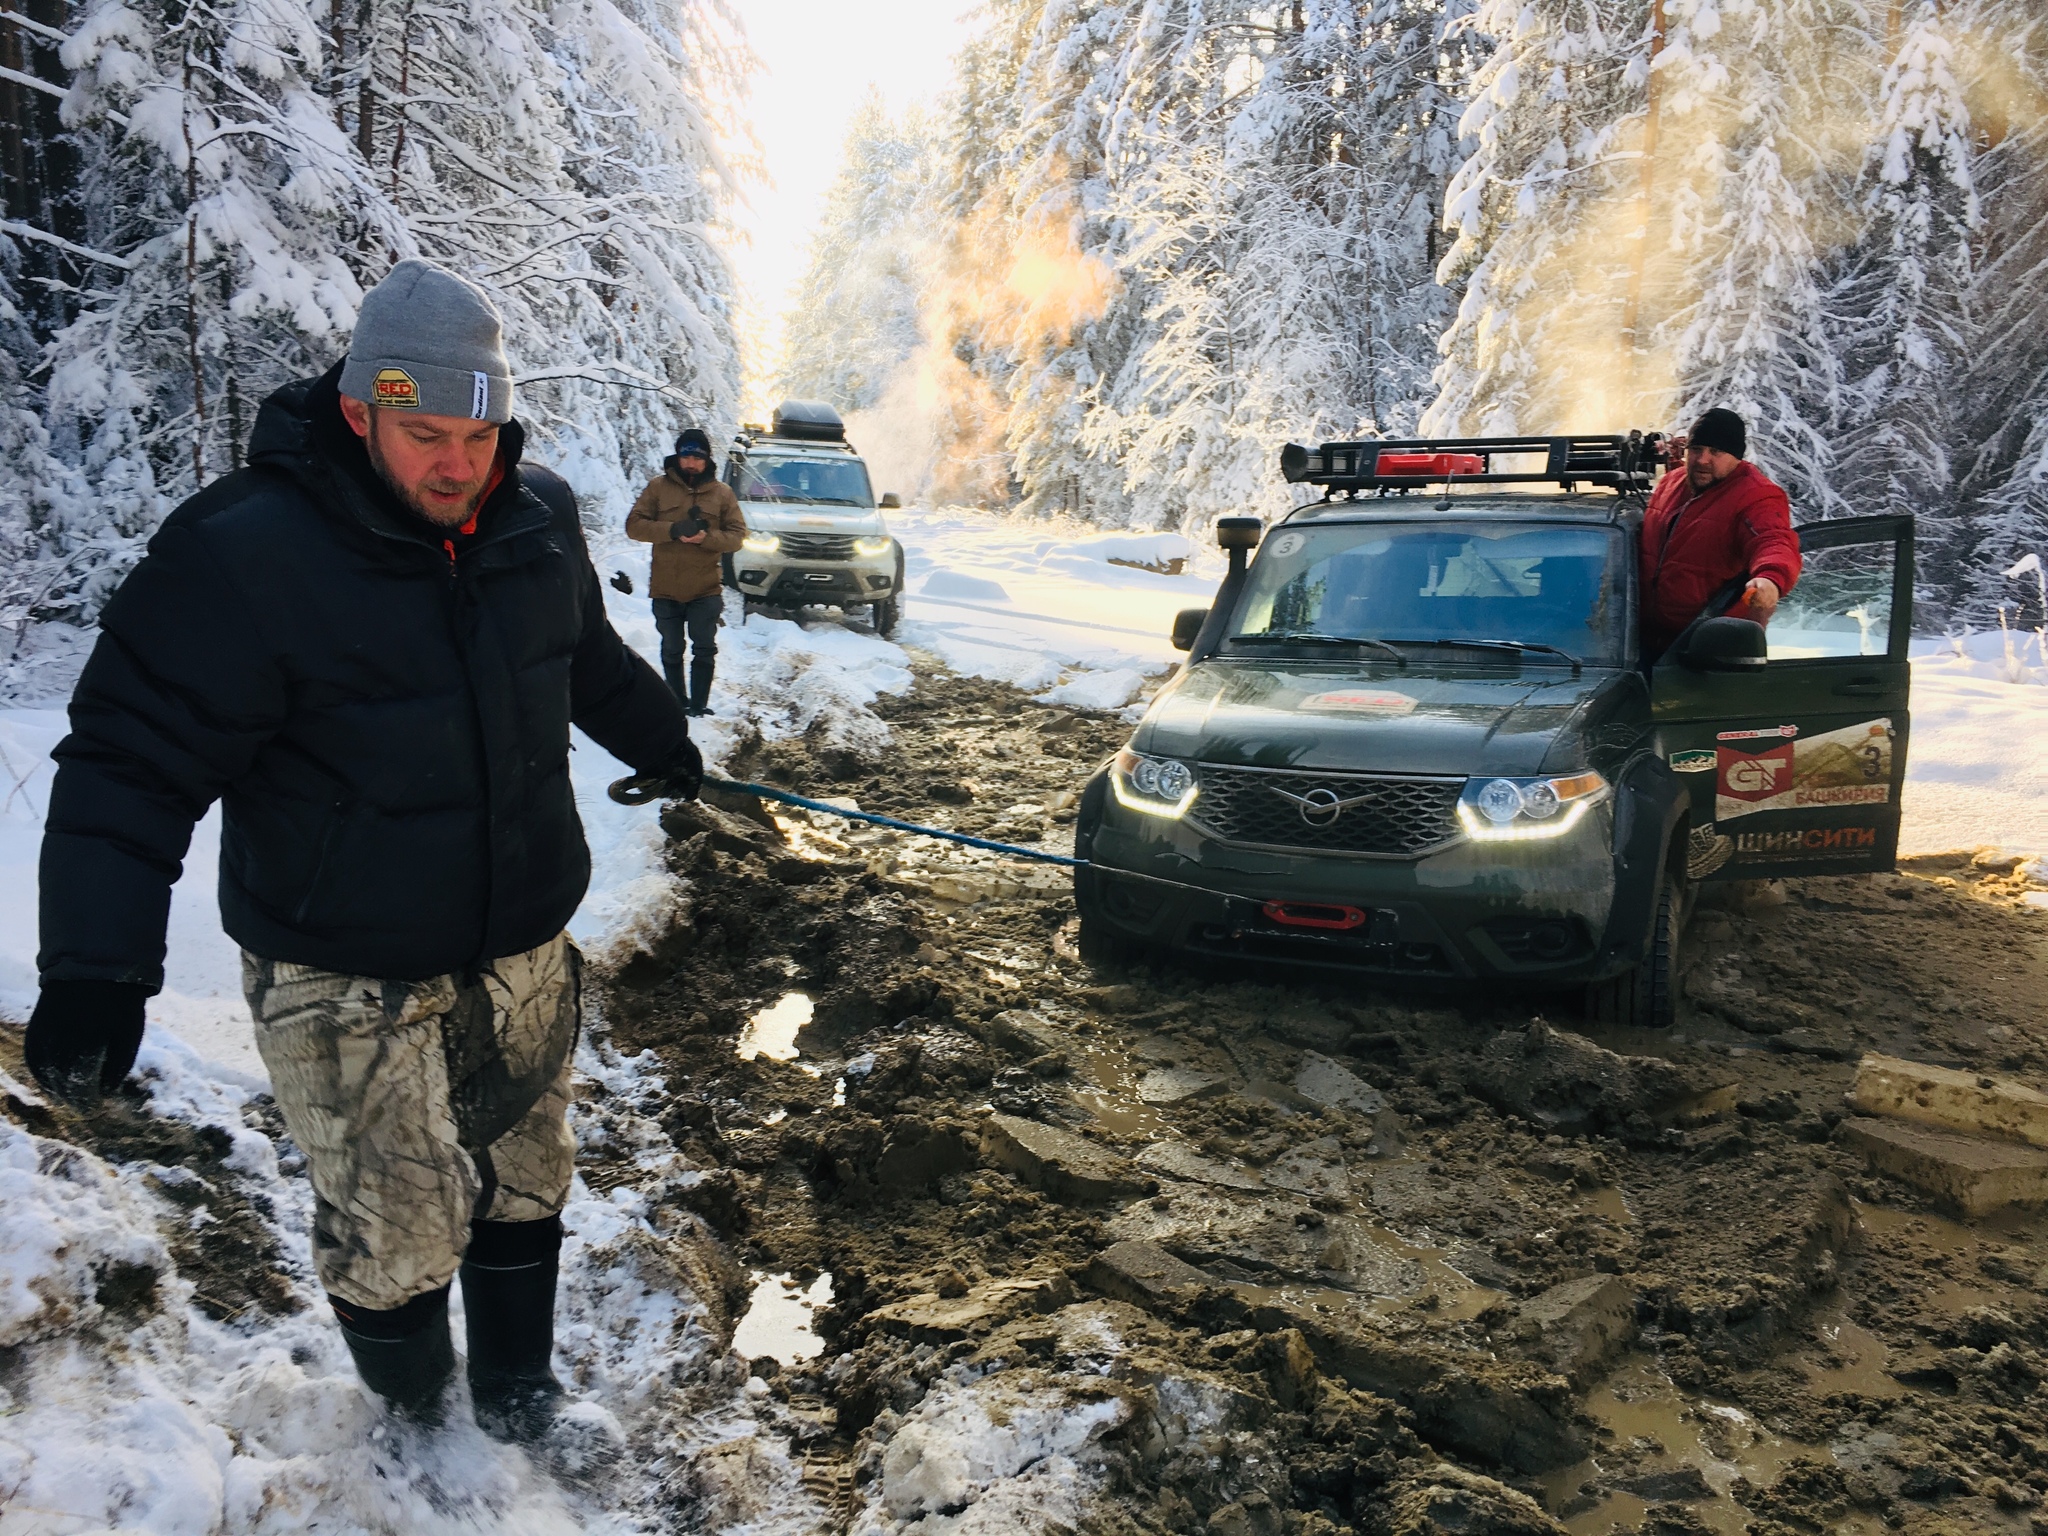 Northern Ural: off-road adventures on Konzhak - My, Konjak, Redoffroad, Offroad, Road trip, Travel across Russia, The mountains, Tourism, Longpost